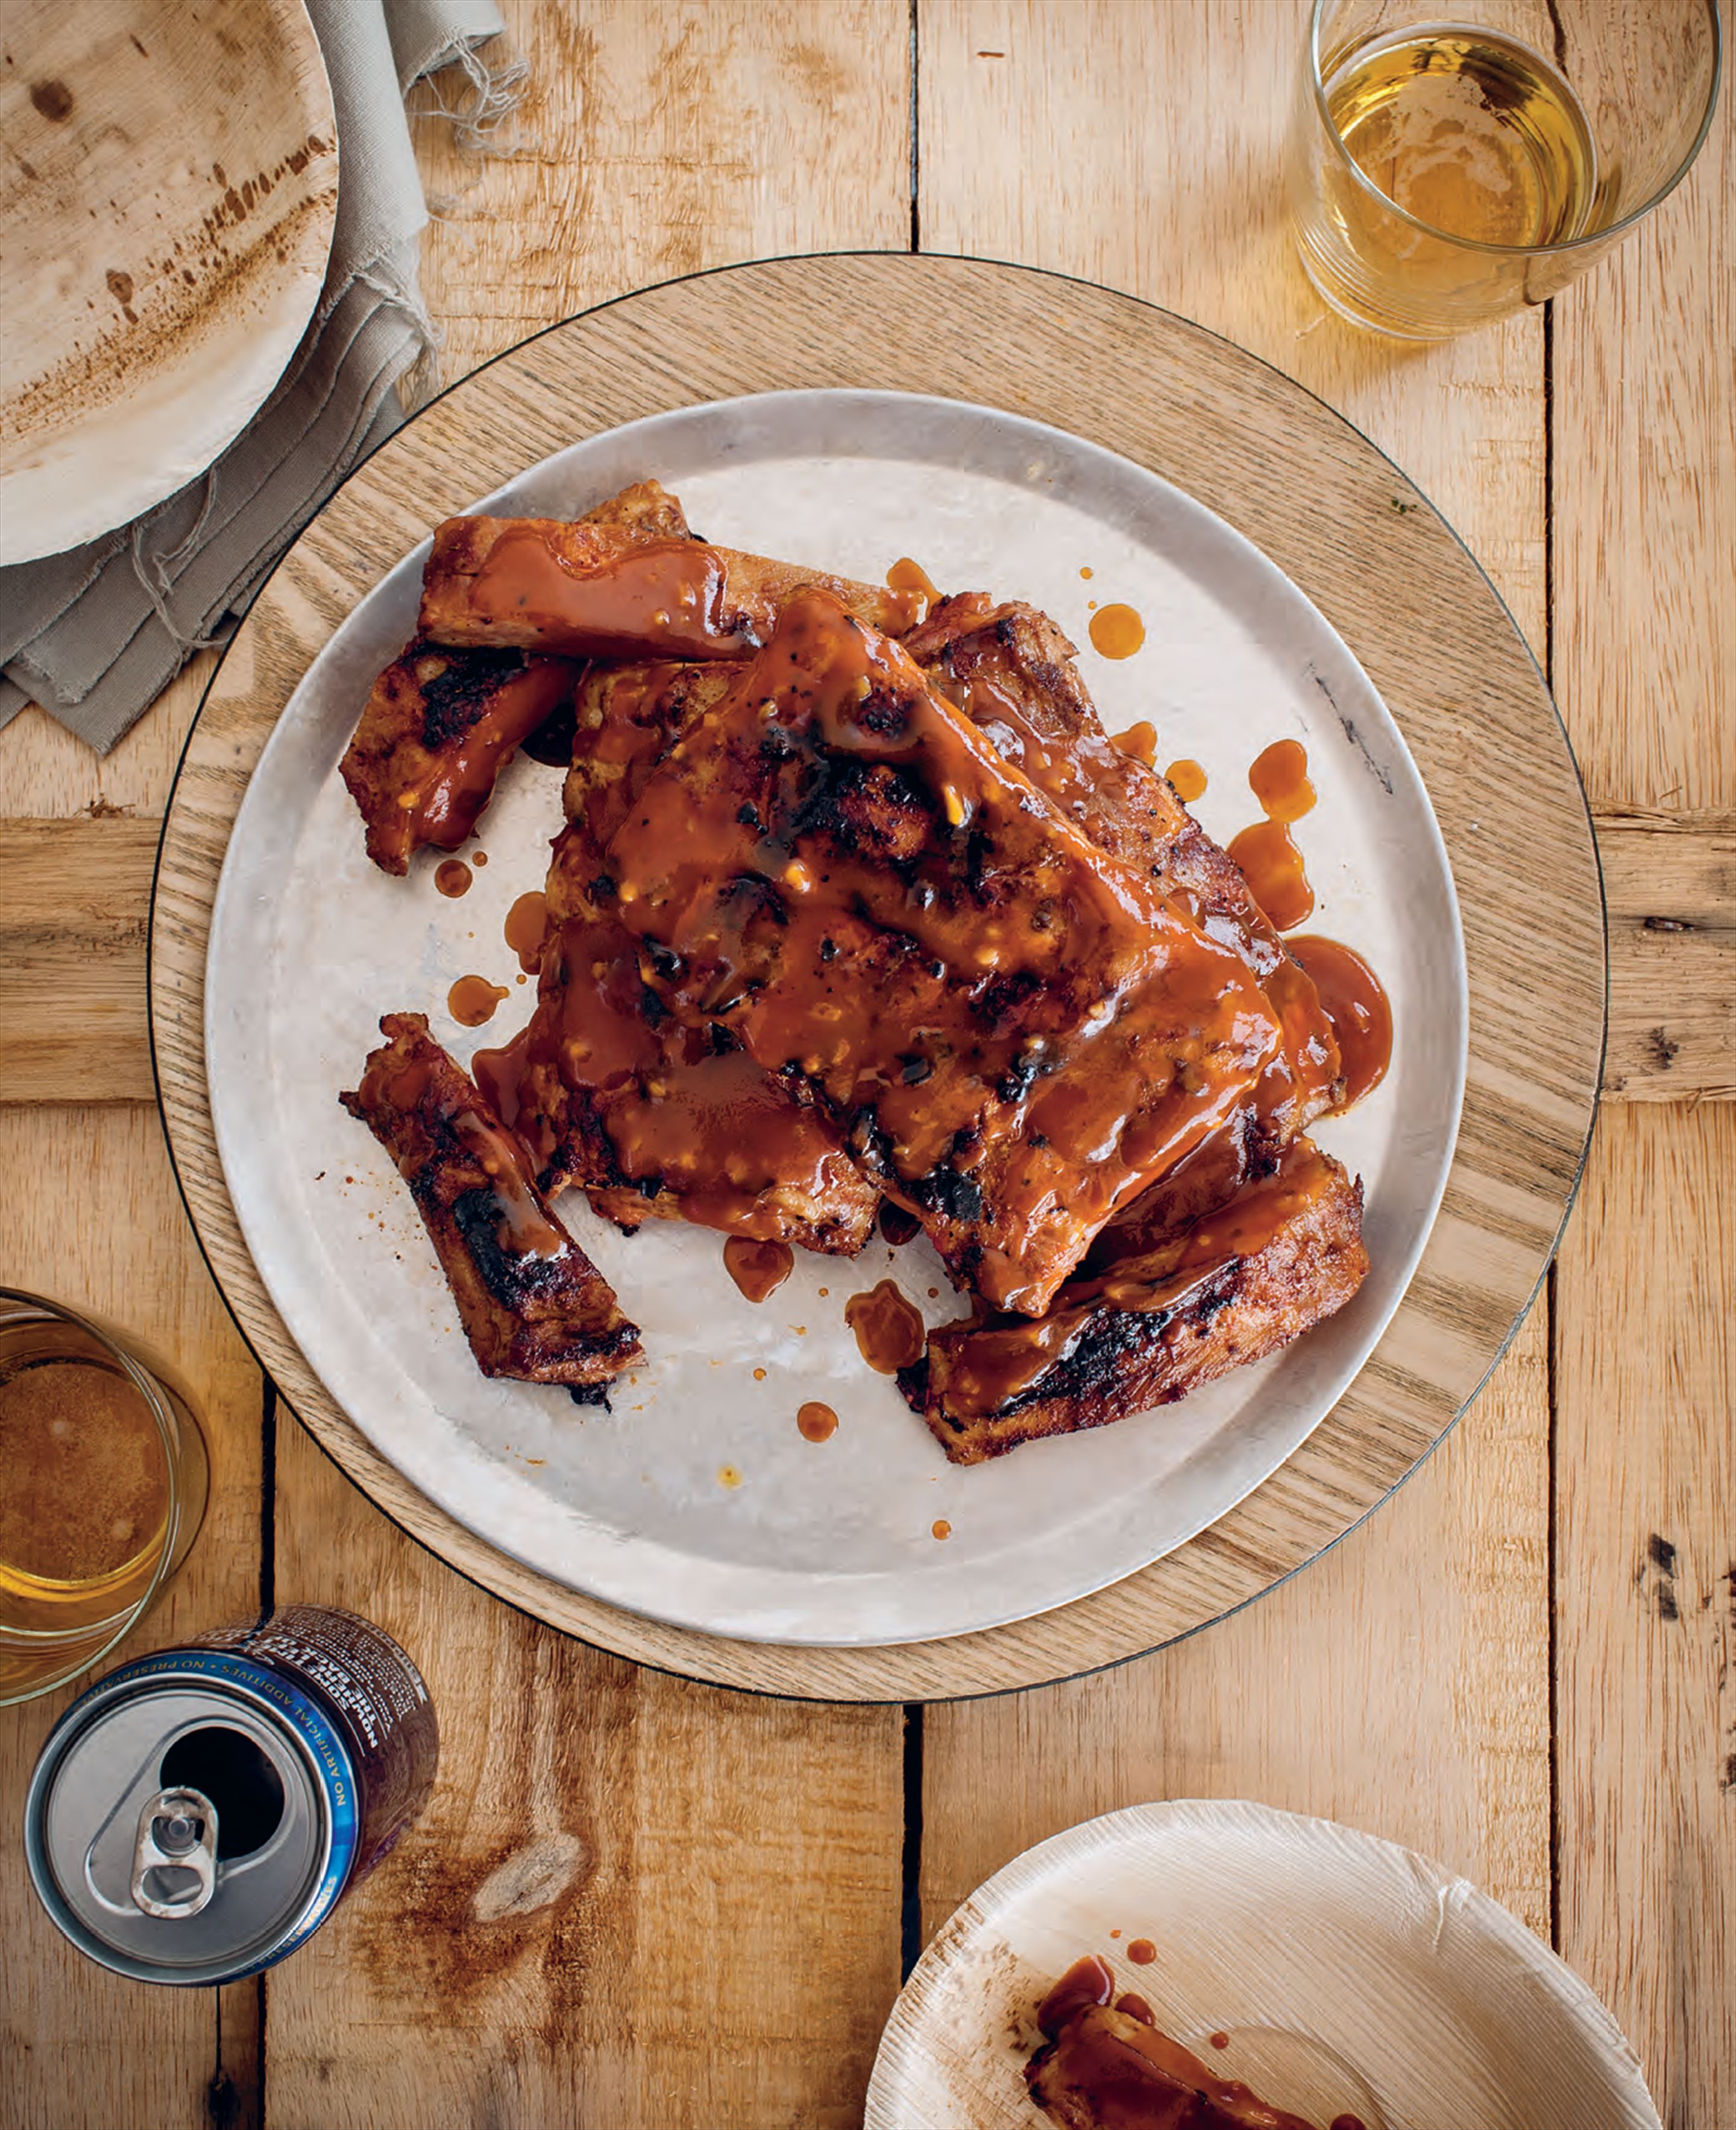 Classic barbecued sticky ribs